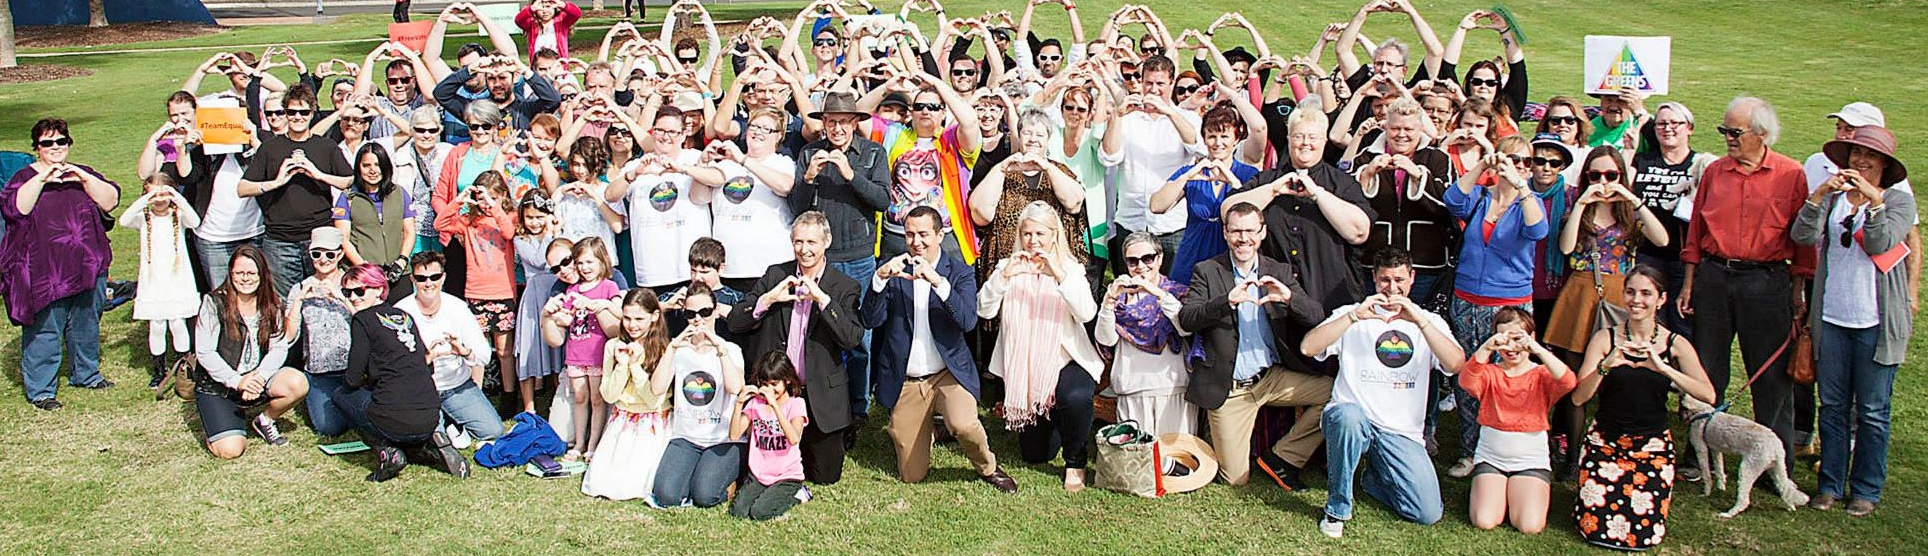 Marriage equality rally in Bowman, Queensland, July 2015 (Photo: Carole Margand)